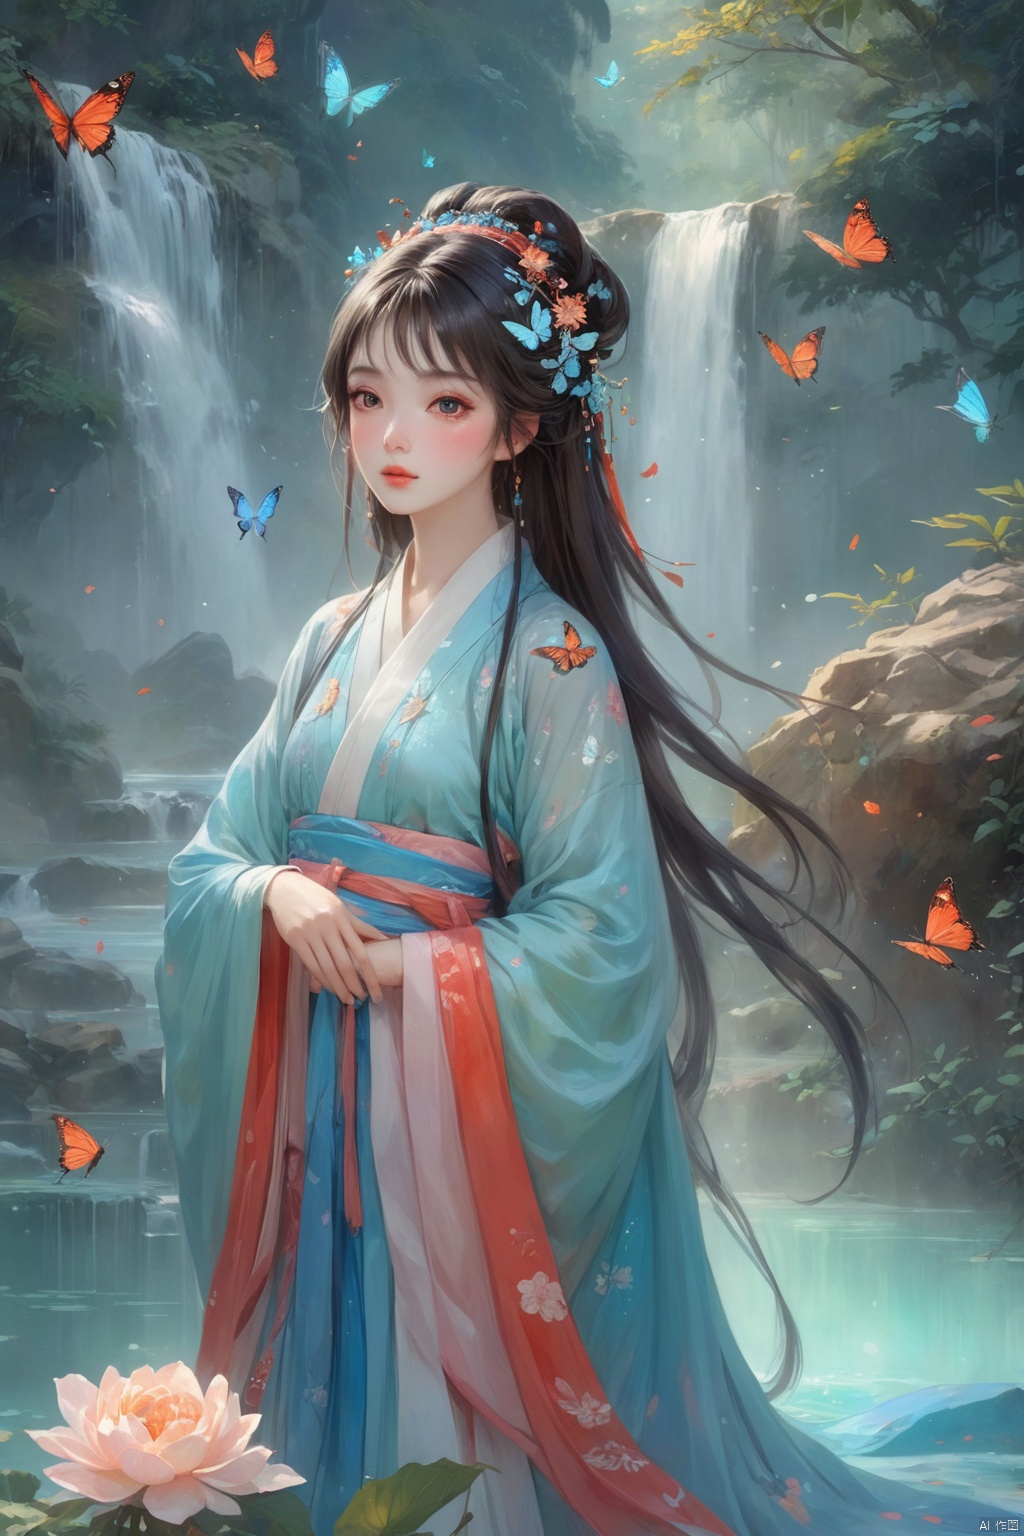  1gril,,hanfu,full body, cloak, QINGYI, shidudou,blue butterfly, in a colorful fantasy realism style, realistic color palette, wink and you miss details,chinese painting\(gongbi\),young woman bathing under a waterfall in an dream like forest,extremely detailed,detailed face,intricate detail,background\(gongbi\),    blue butterfly, in a colorful fantasy realism style, realistic color palette, wink and you miss details, japanese style art, fluid and organic shapes, light teal and light red, light reflection,blue butterfly, in a colorful fantasy realism style, realistic color palette, wink and you miss details,sleeve,flower headband,roses background,4k,8k,round eyes,round pupil,happy,colourful,fantasy magical,complex hair detail,happy,texture on clothings,fireflies,